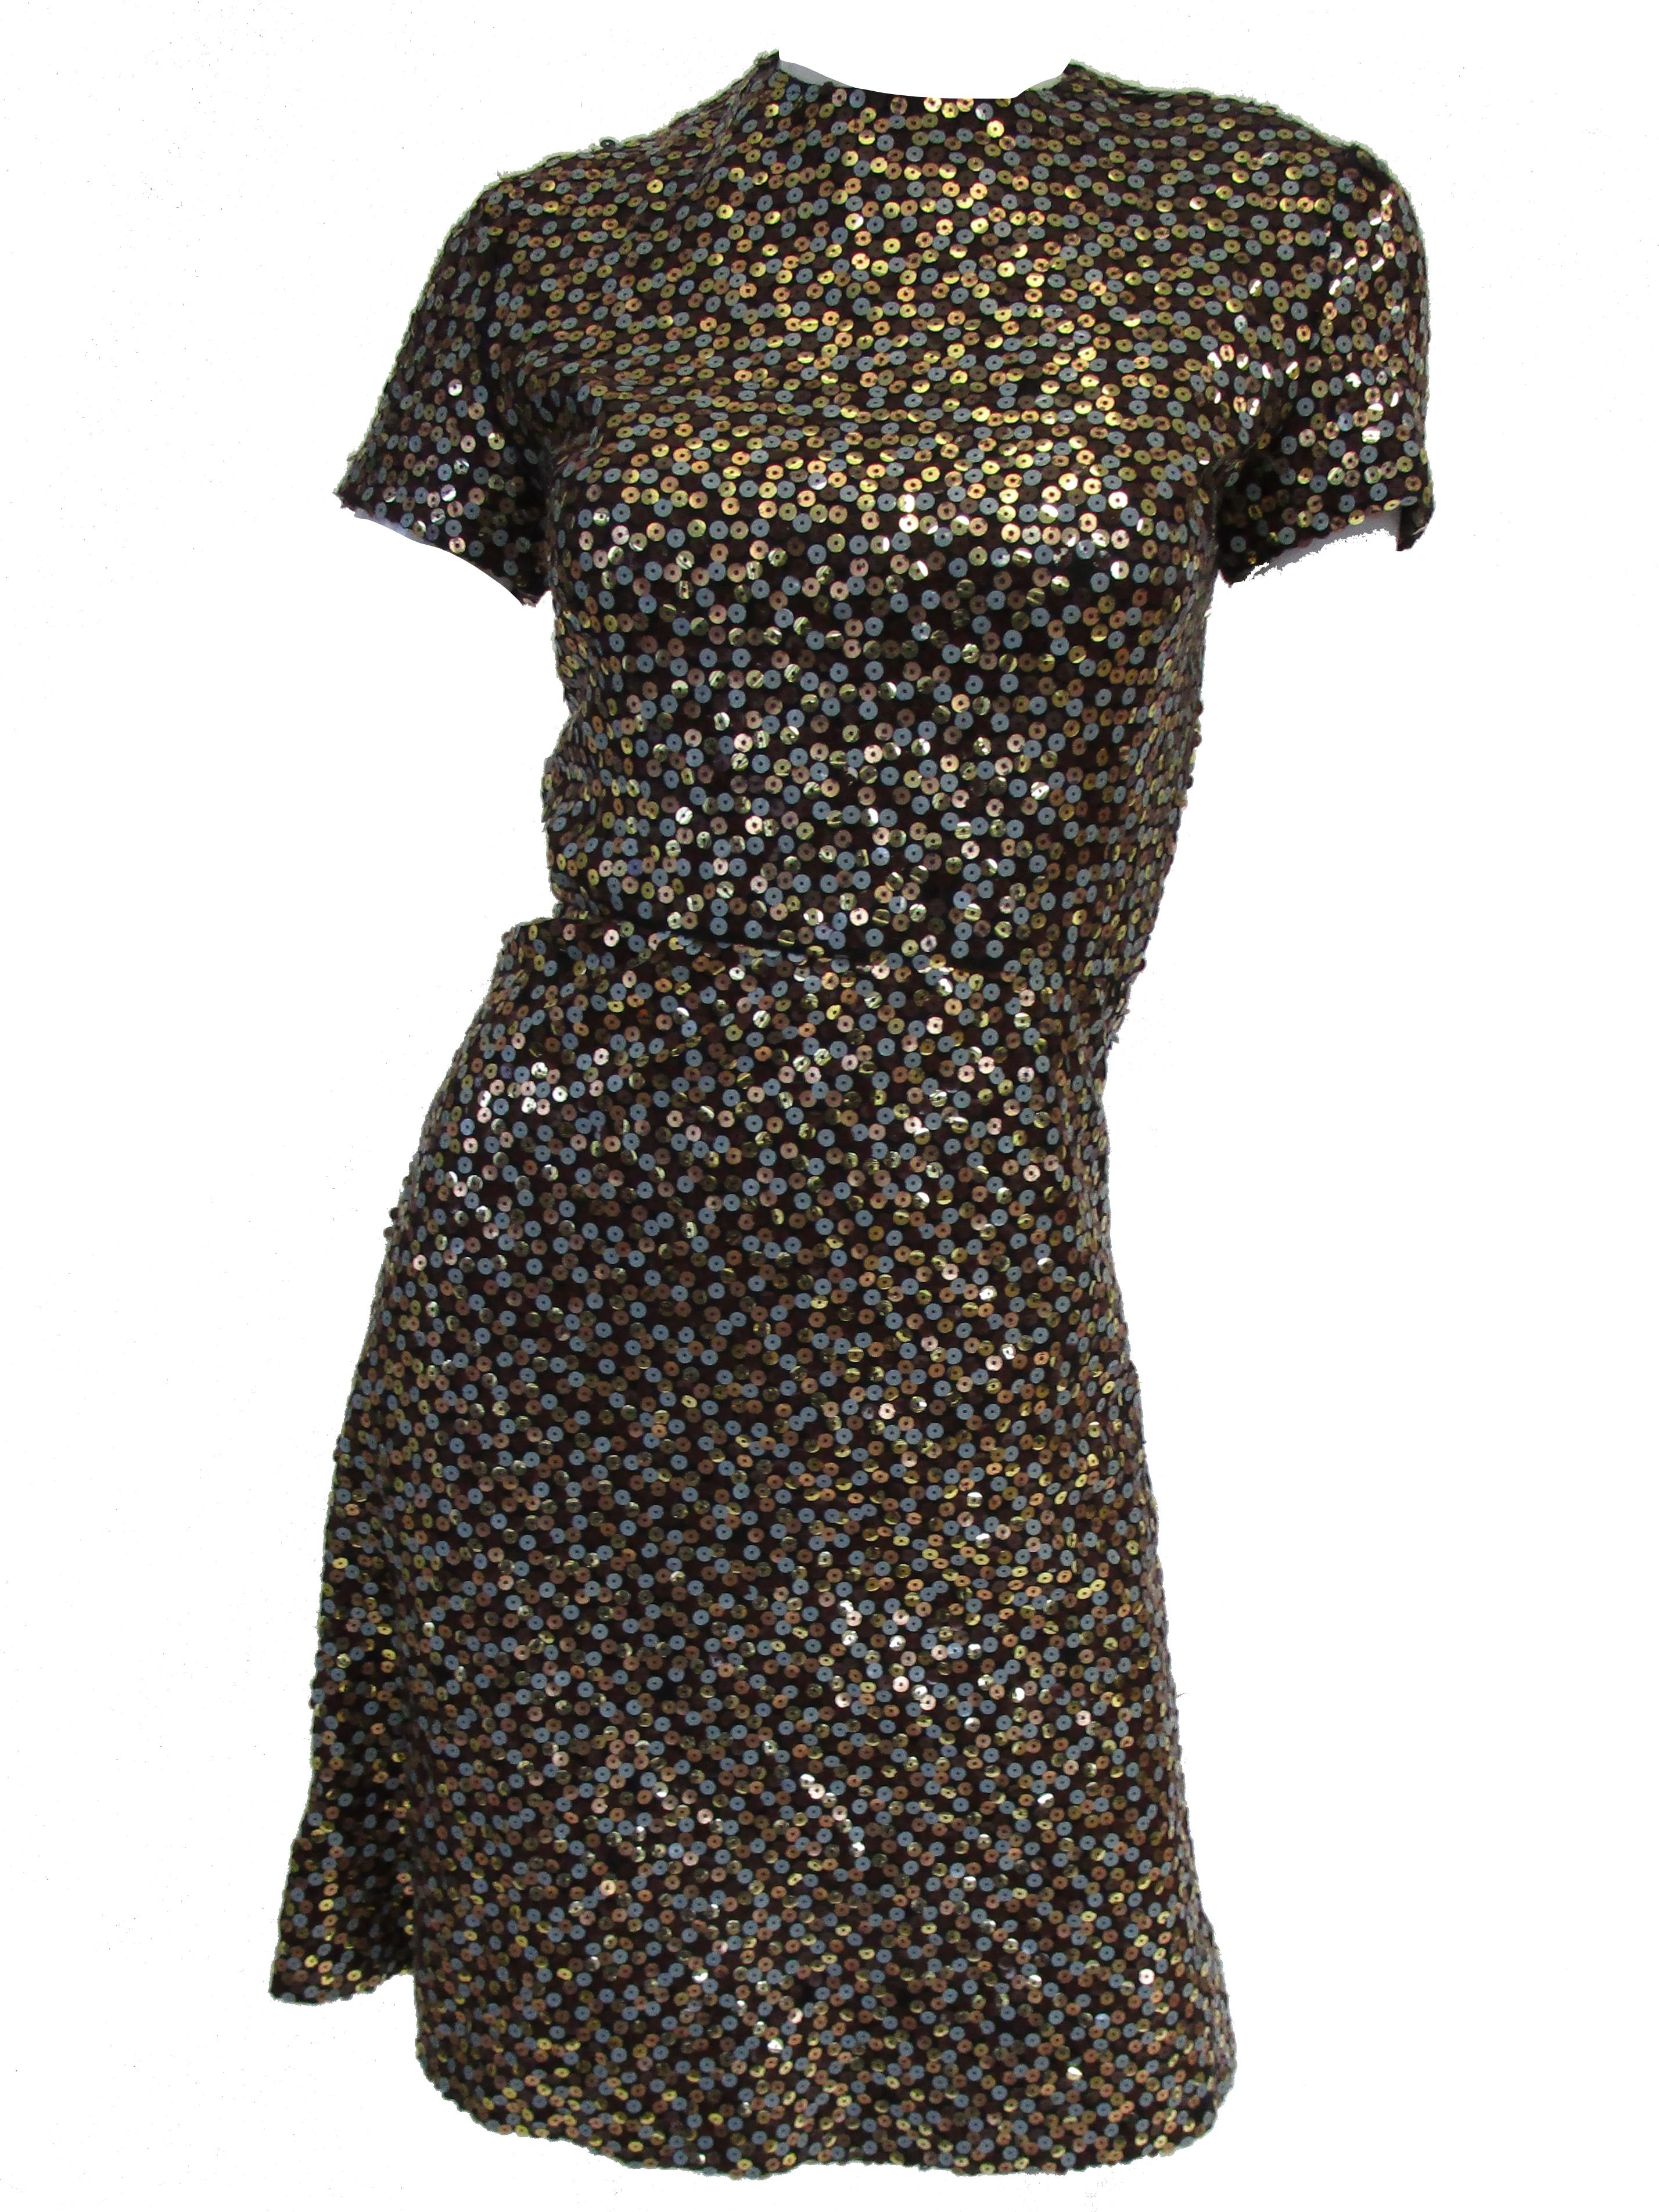 Black 1960s Bill Blass Grey and Gold Sequin Dress with Sequin Lined Jacket xxs